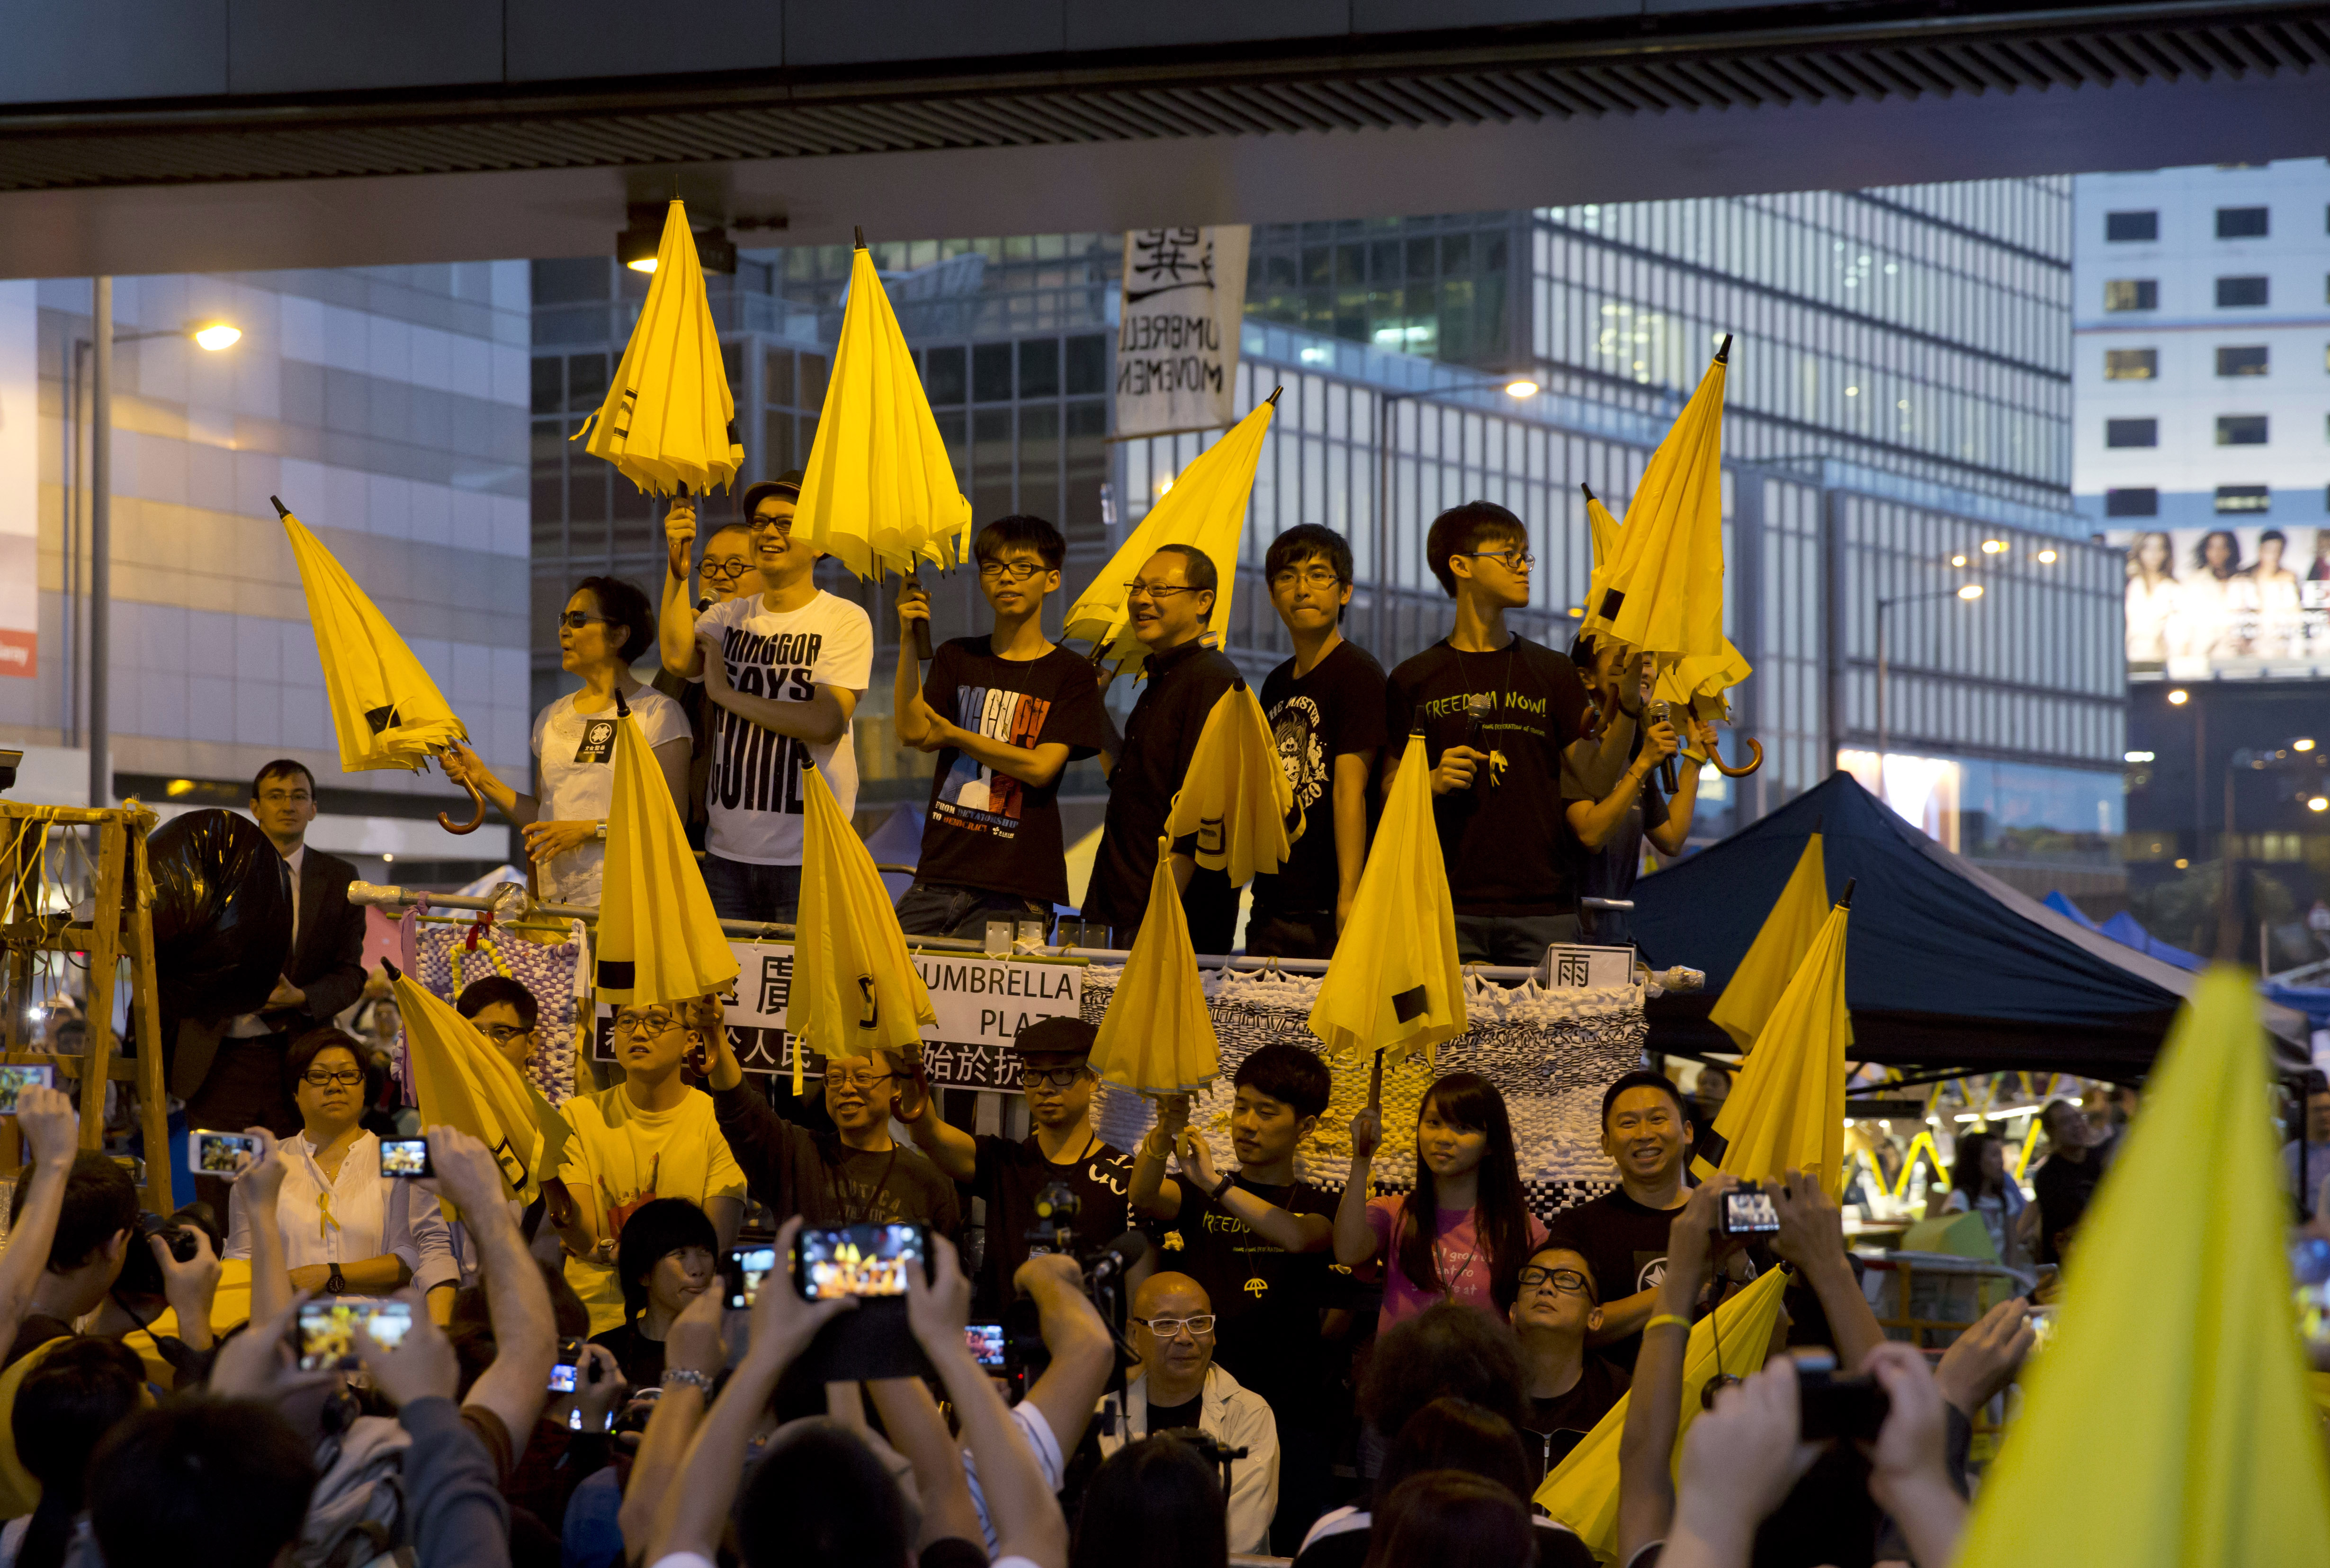 Hong Kong: Pro-democracy student activists to face charges after pro-Beijing chief chosen